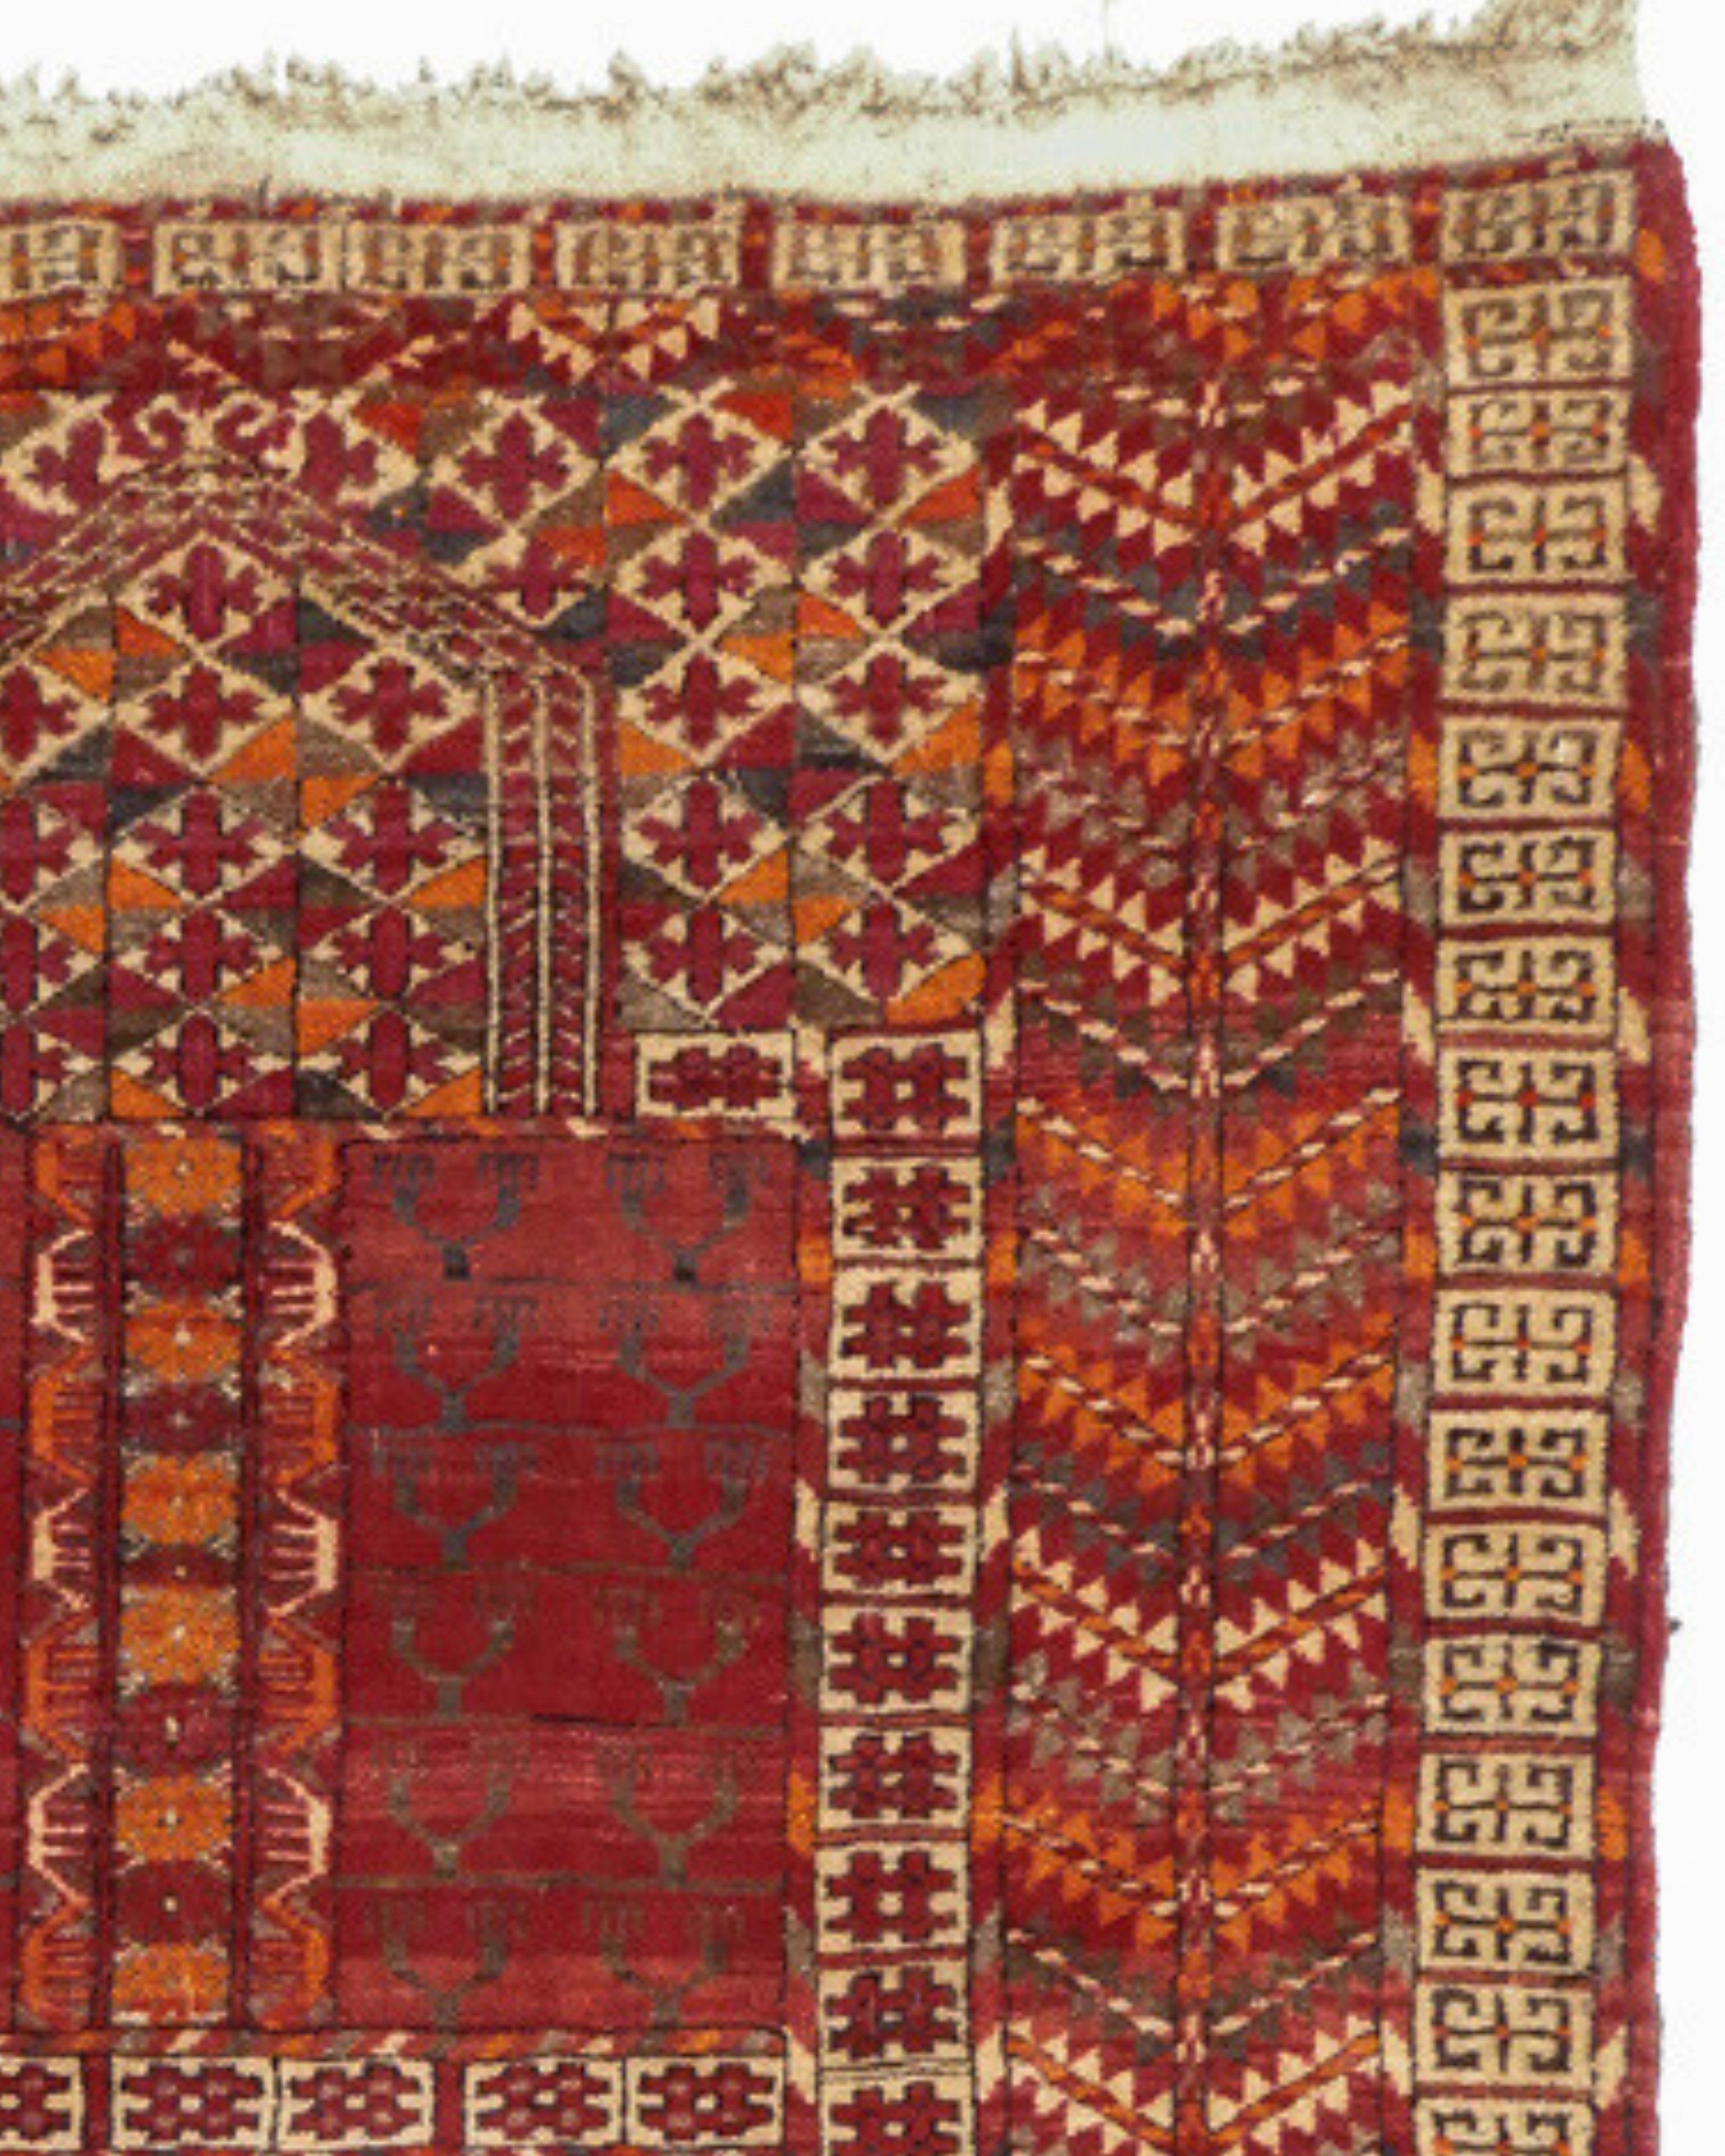 Antique Turkmen Ensi Rug, Early 20th Century

An ensi is a type of Turkmen rug woven specifically as a door flap for a yurt. The cruciform field design is thought to derive from wooden Central Asian doors. Because of the inclusion of a directional